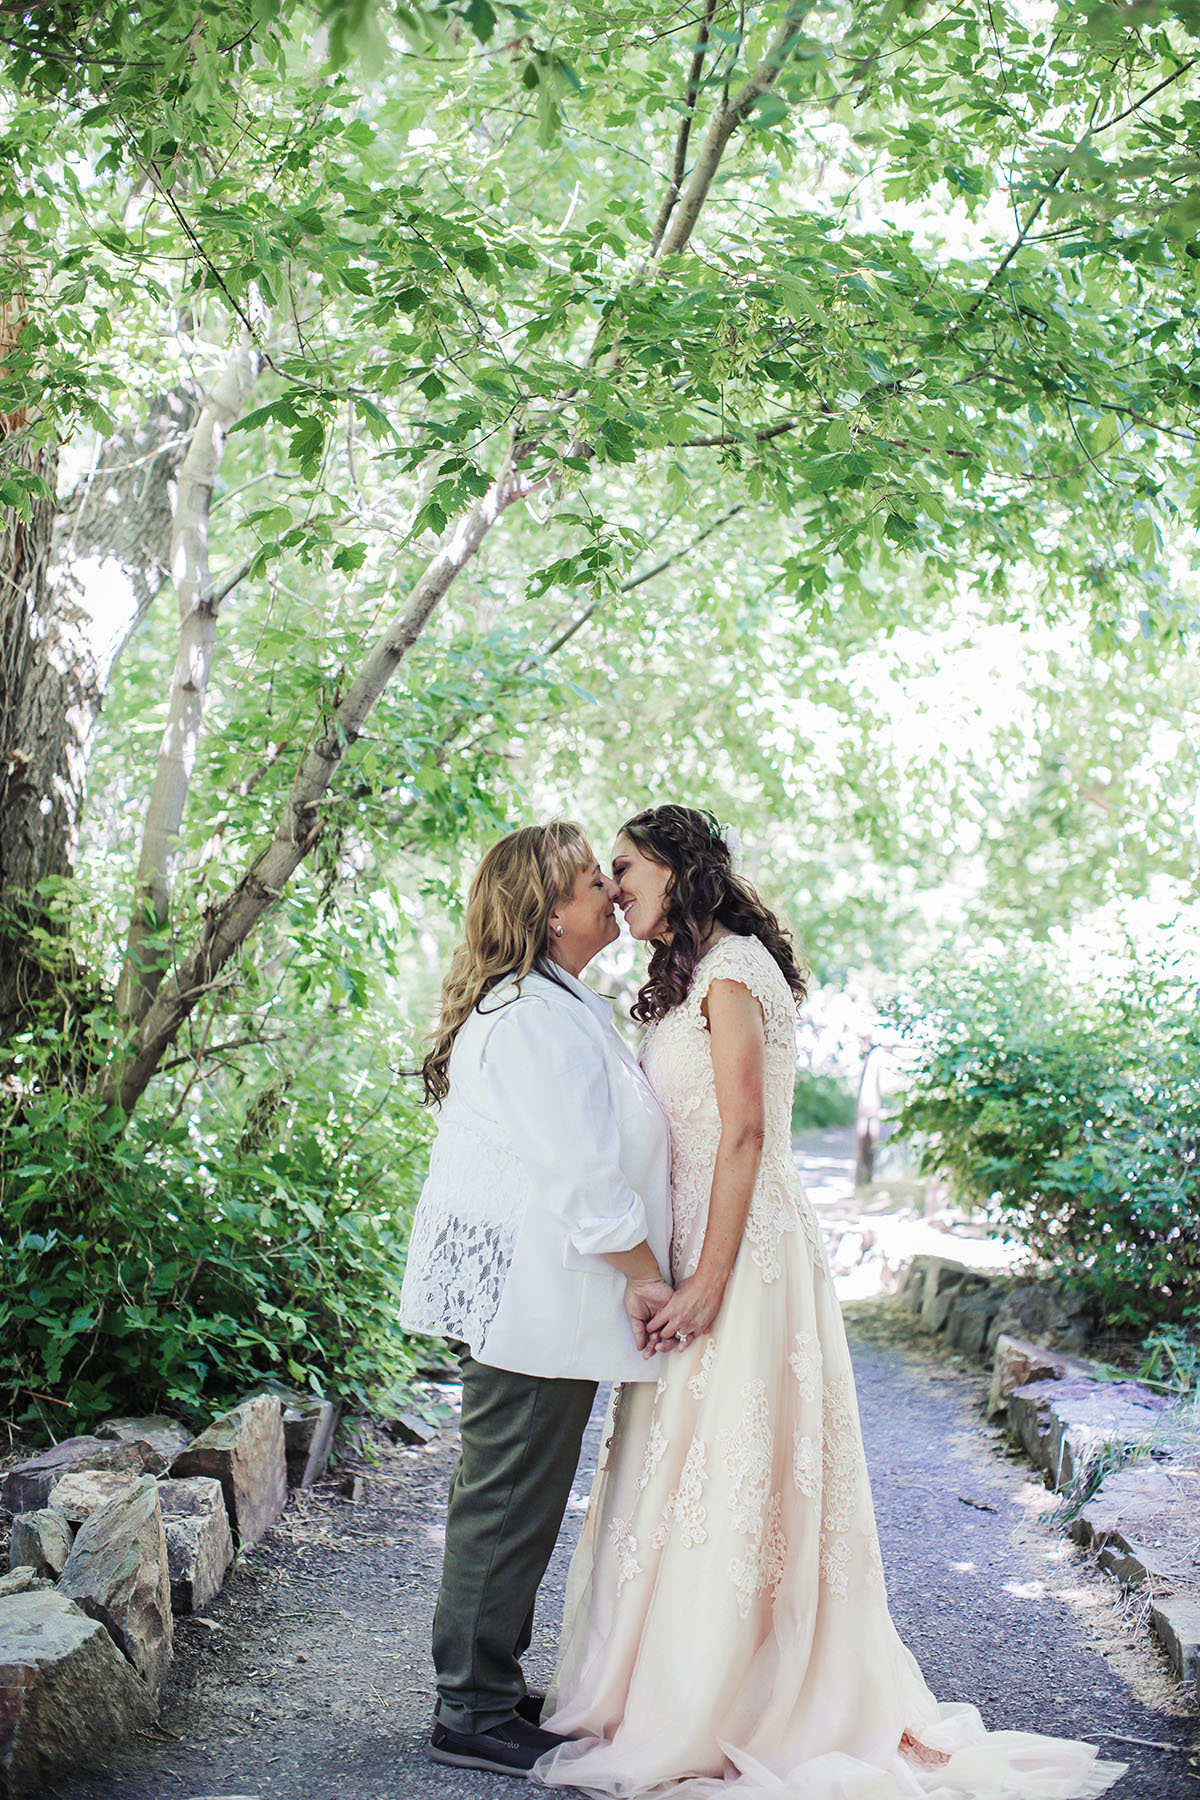 Eclectic bohemian mountain fairytale wedding two brides long tulle champagne dress Lane Bryant outfit flowers nature kiss